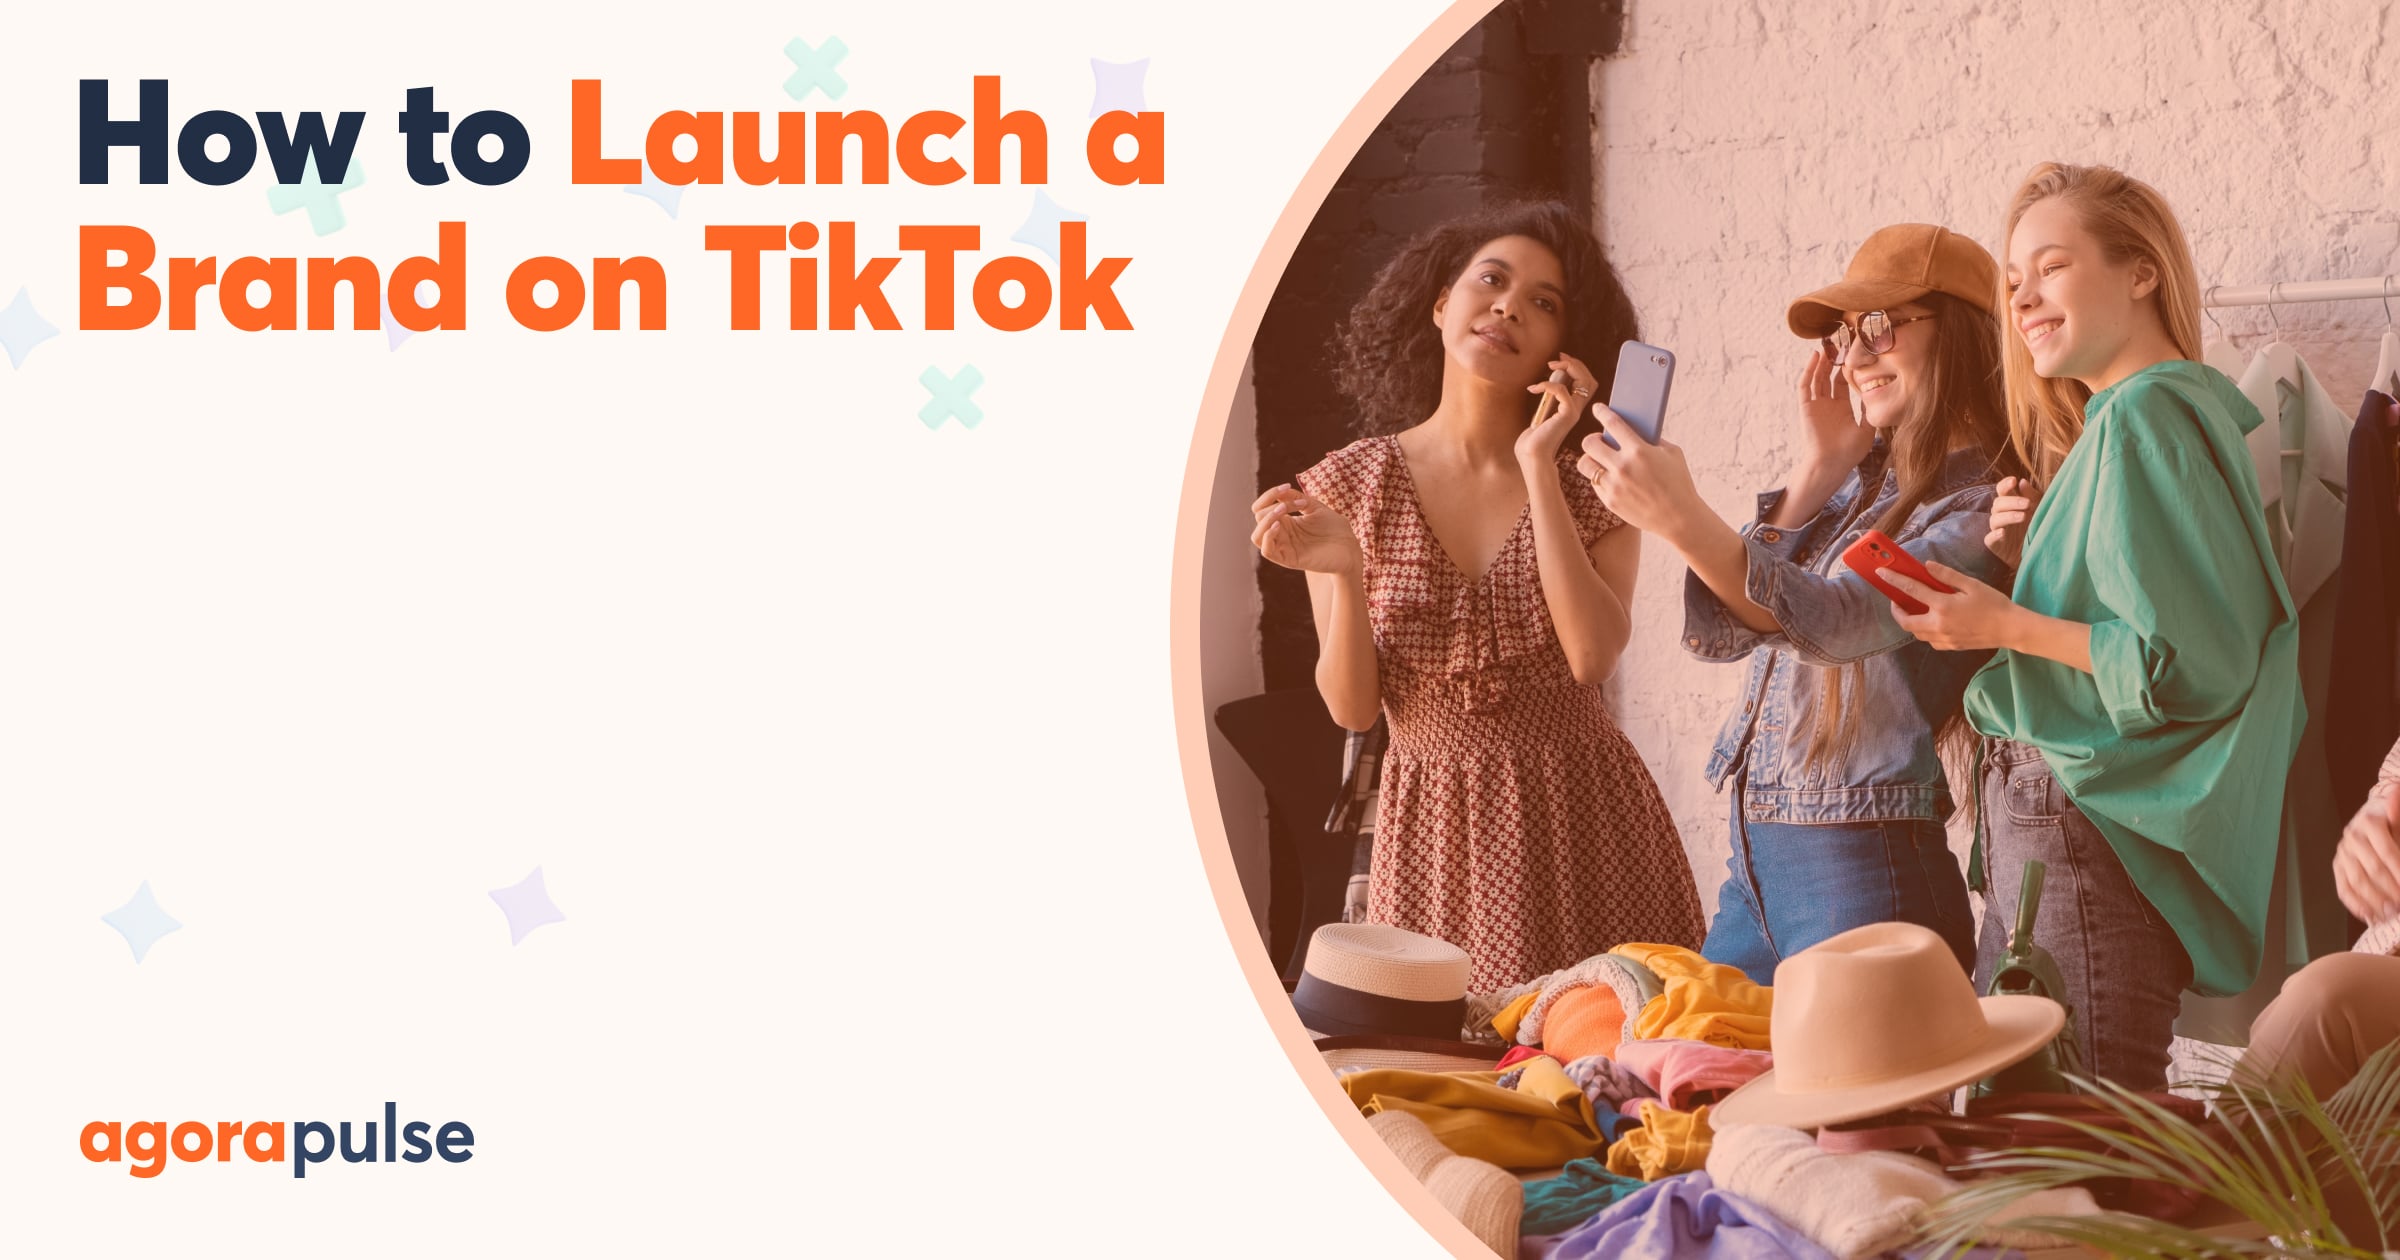 Hey there! We inagurate our Tik Tok page presenting you our new produc